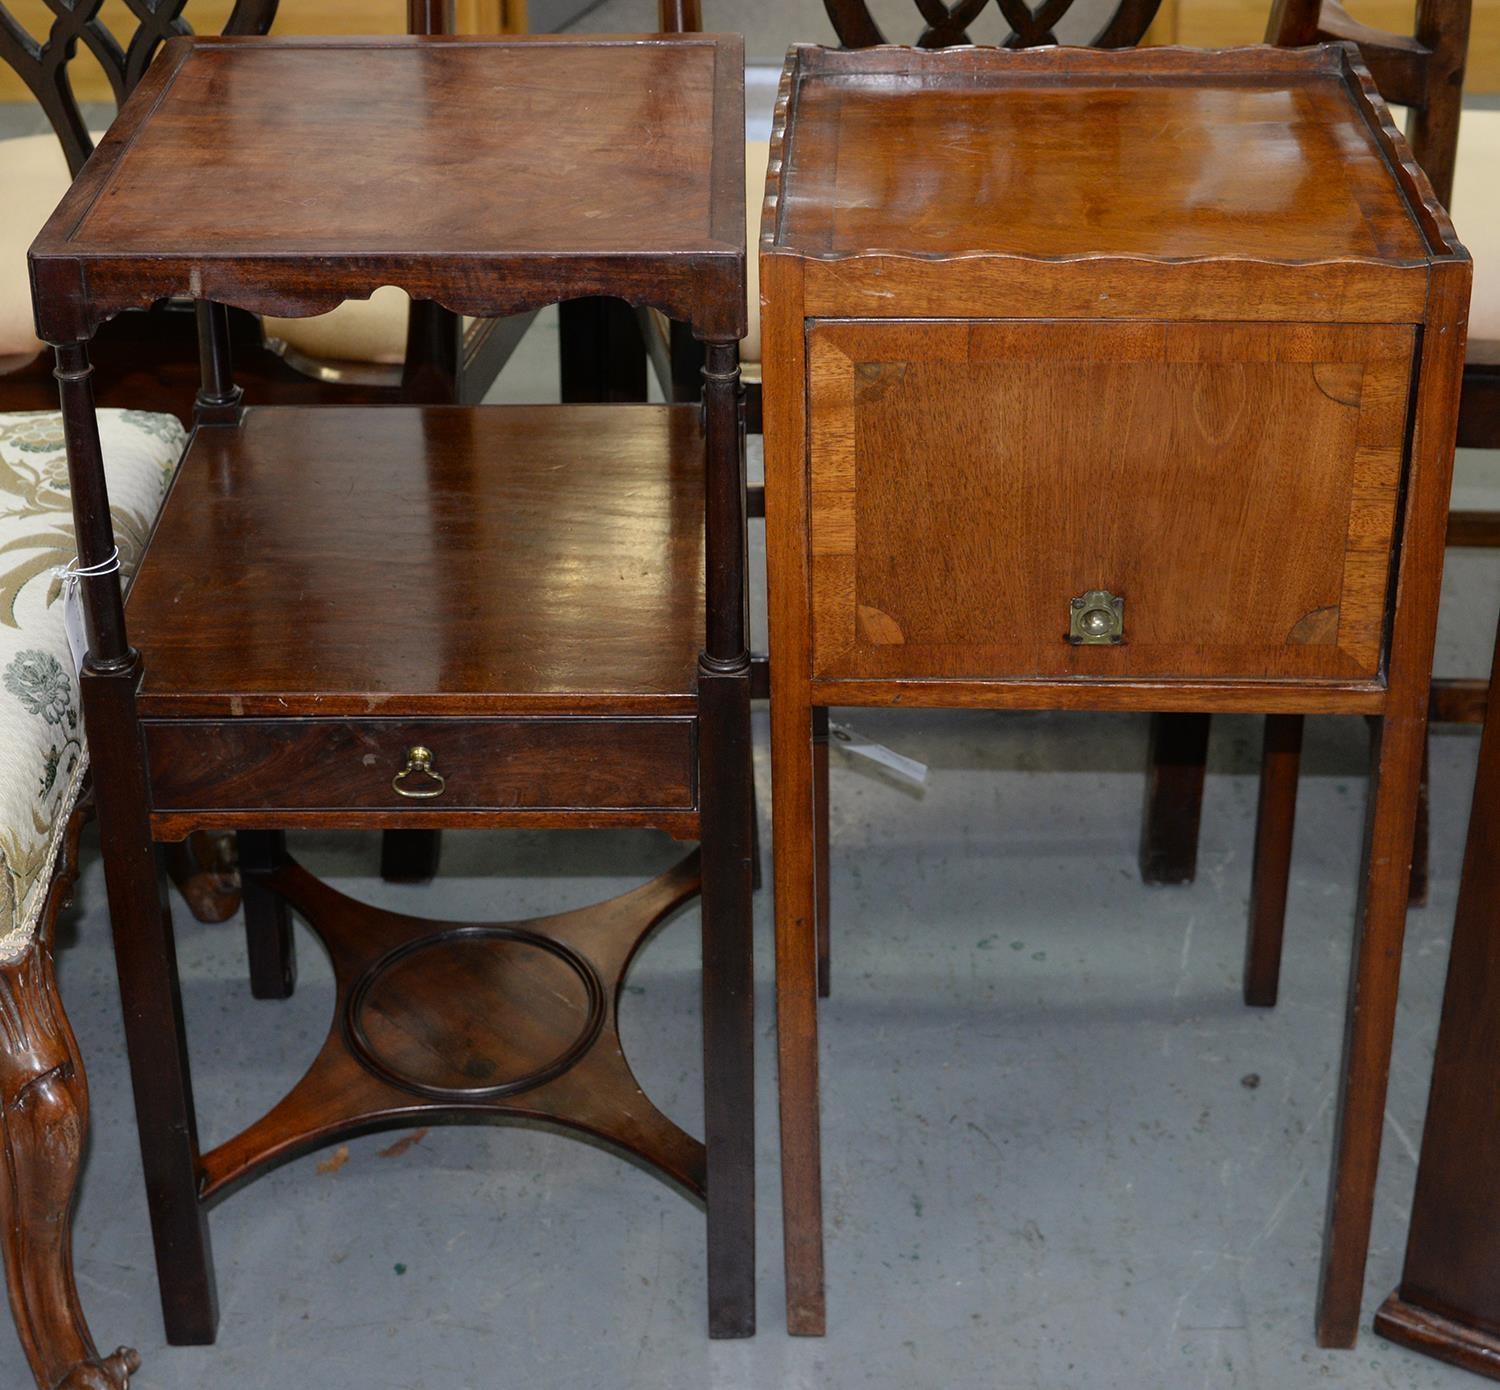 A GEORGE III MAHOGANY WASHSTAND, C1800, THE CENTRAL SECTION FITTED WITH A DRAWER, 76CM H; 34 X